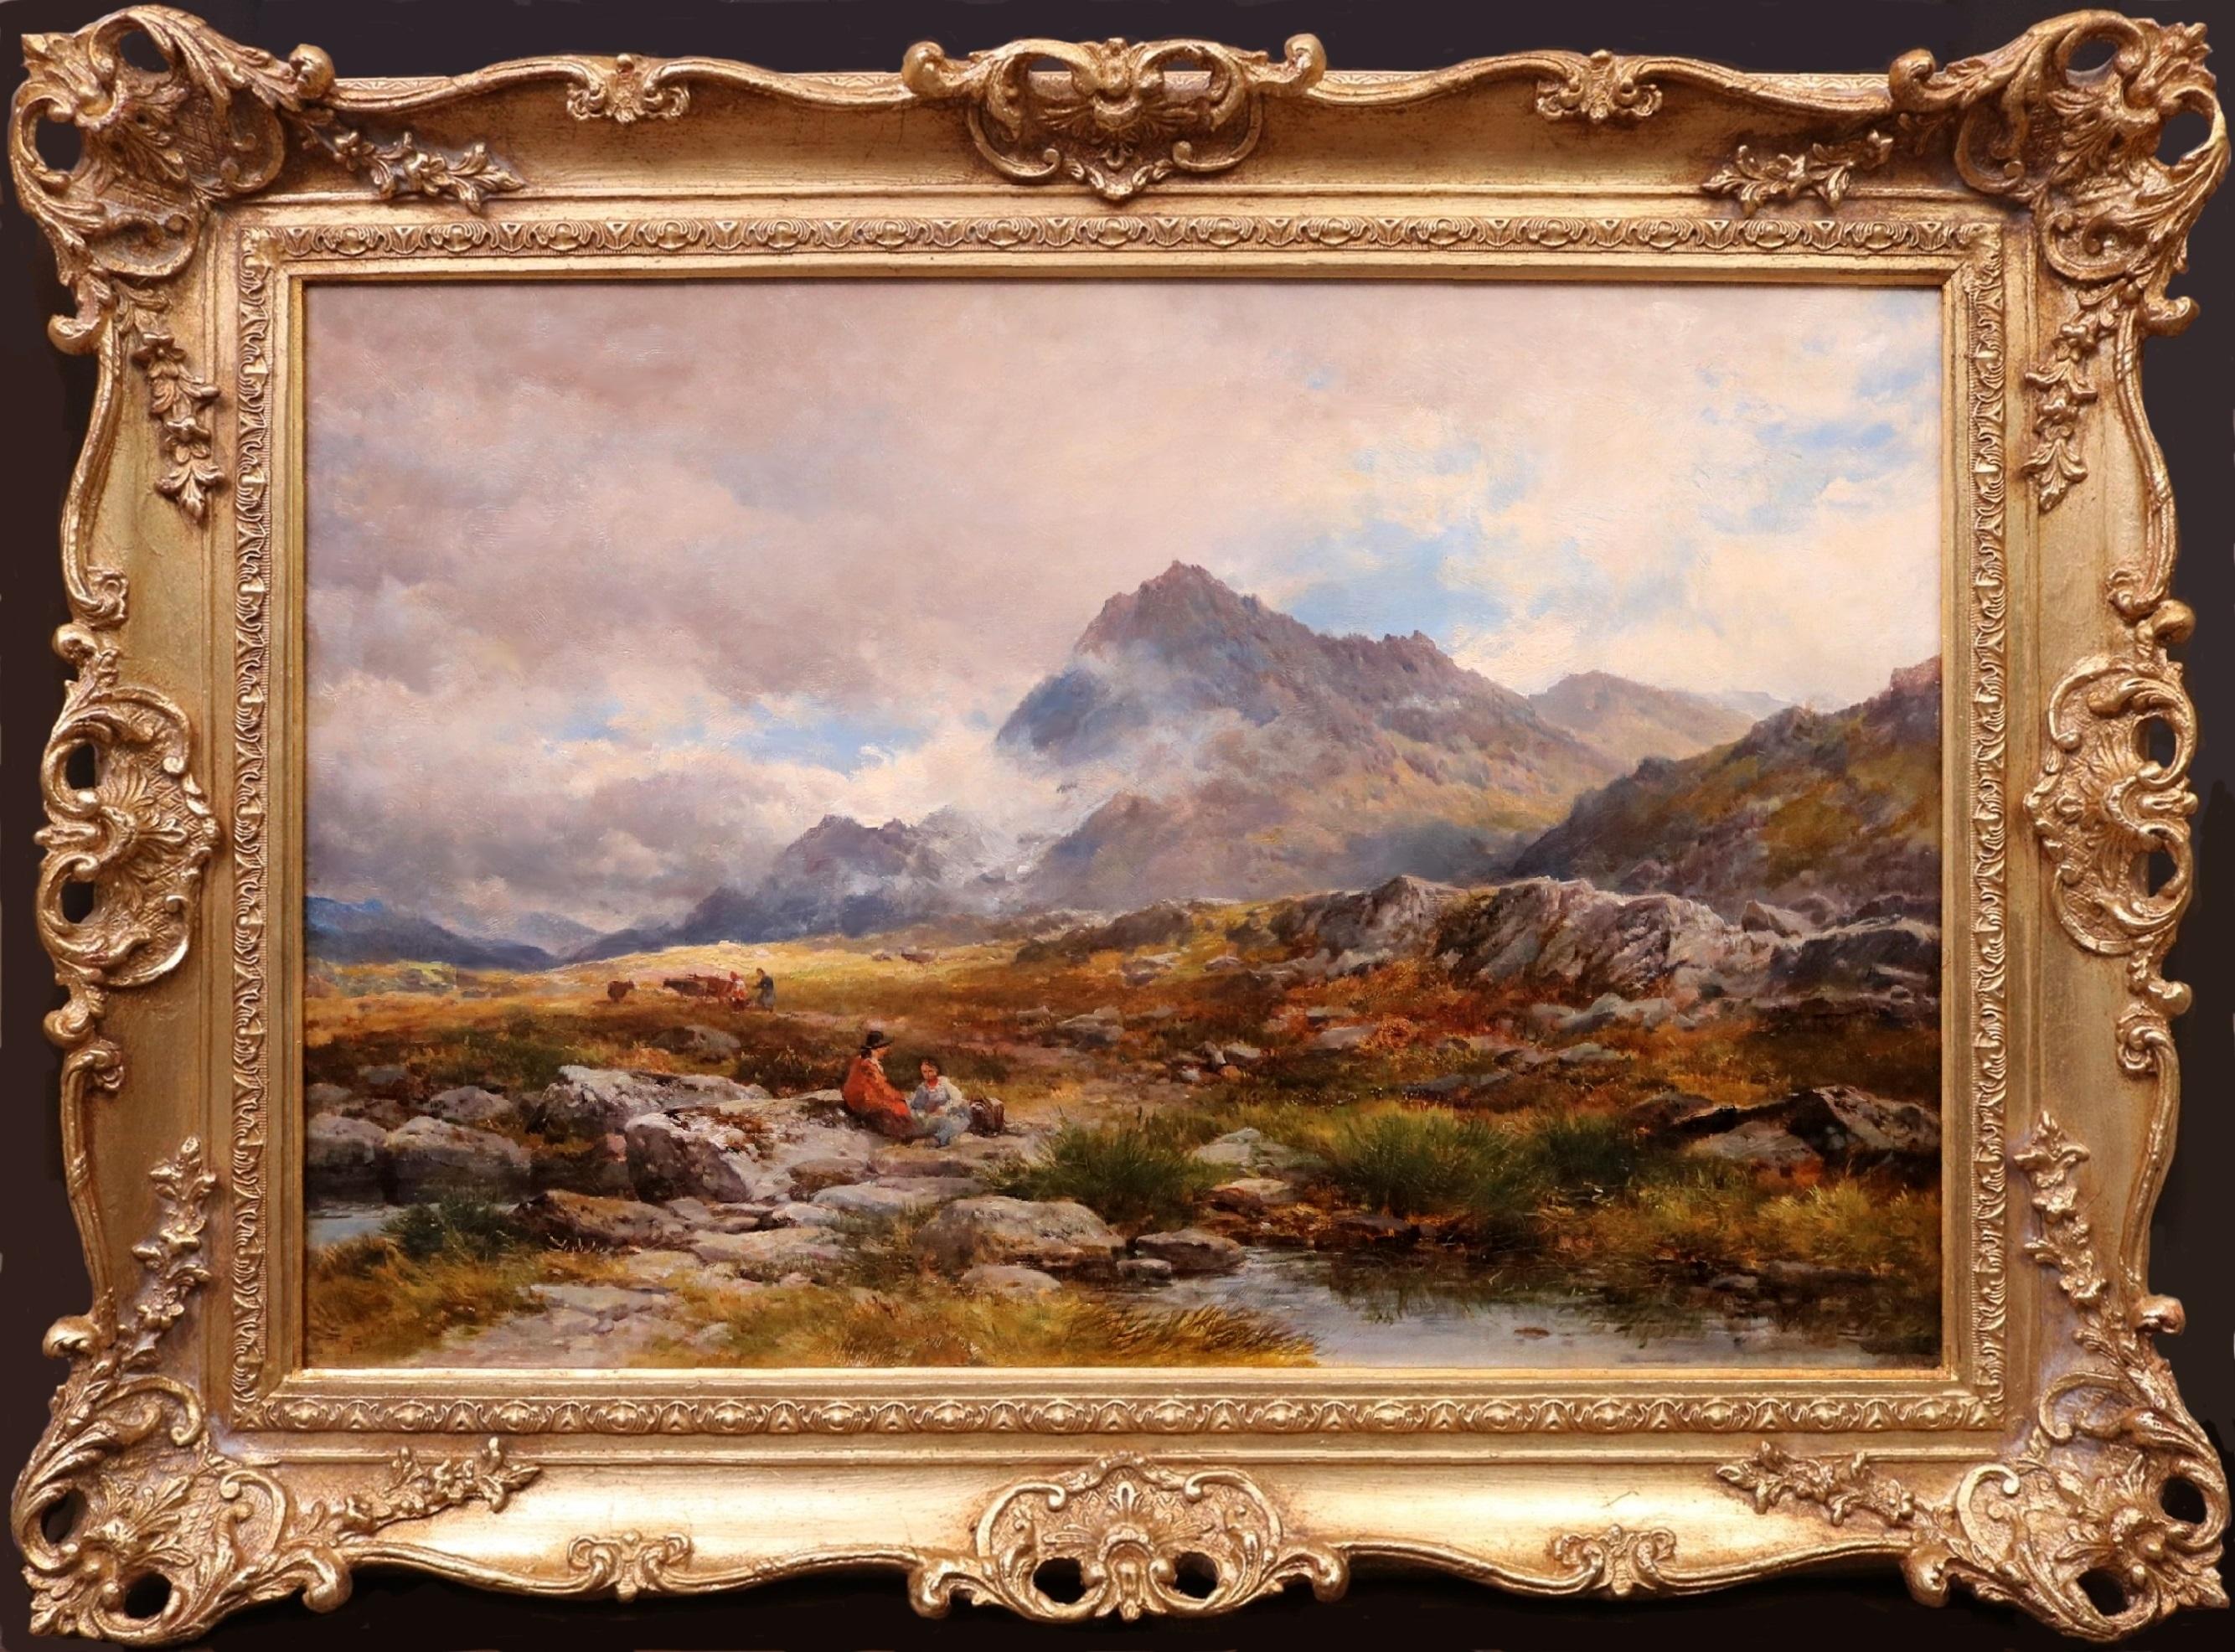 ‘Before Glyder Fawr’ by John Syer RBA RI (1815-1885). 

The painting – which depicts the famous Welsh mountain in Snowdonia – is signed by the artist and dated 1876. 

Academy Fine Paintings only offers artwork for sale in the finest condition it